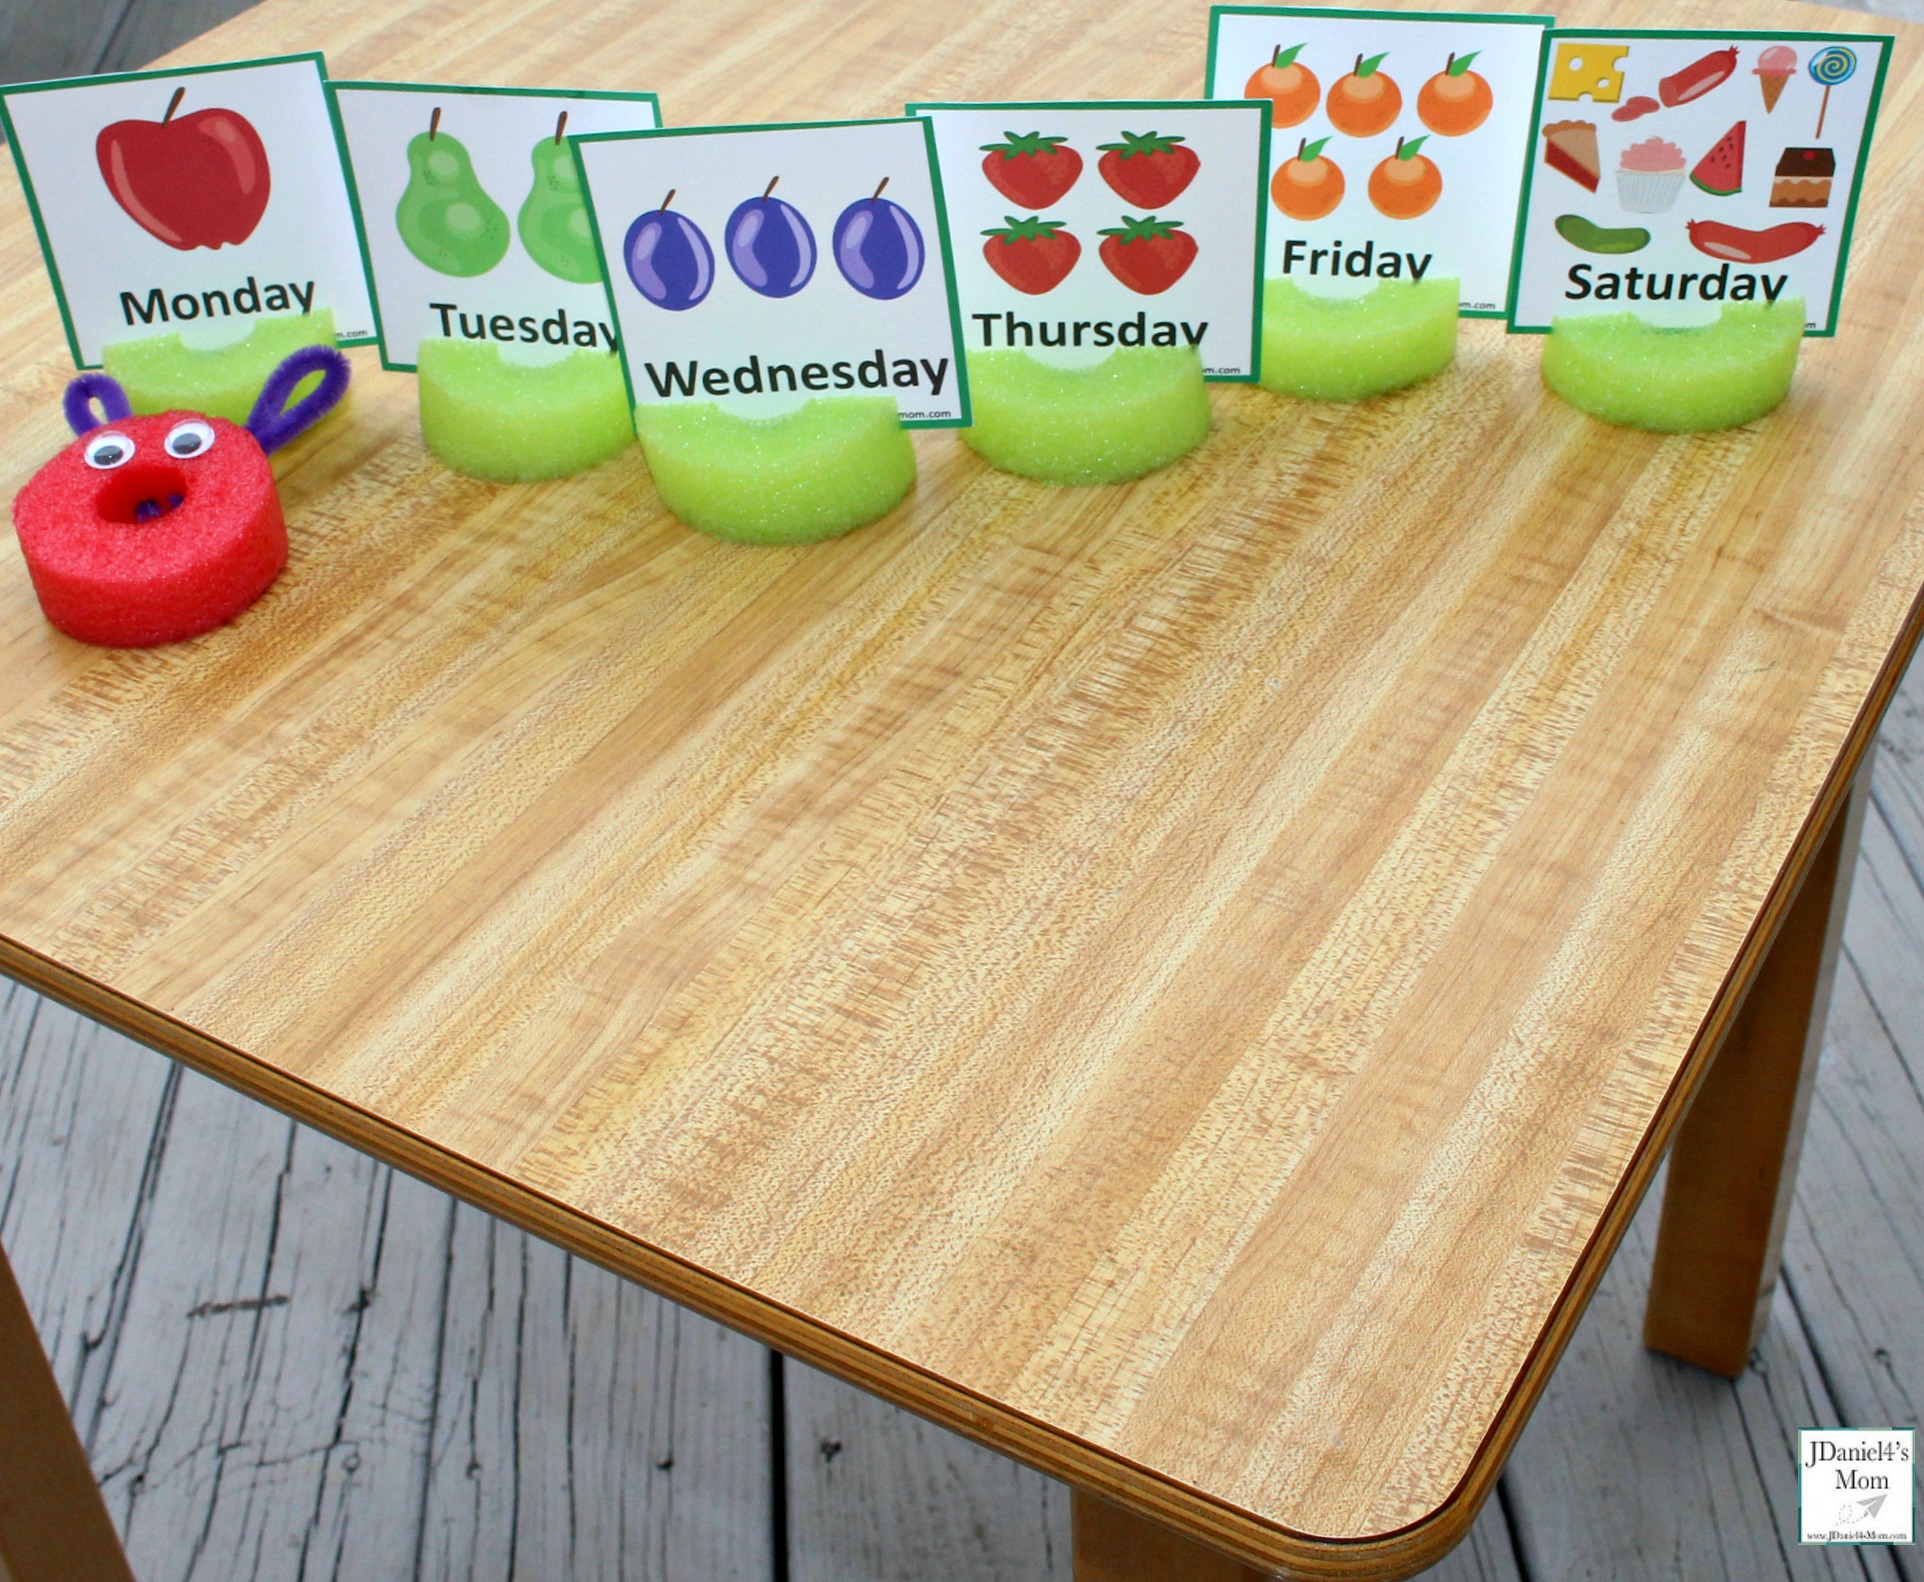 the-very-hungry-caterpillar-number-sequencing-activities-with-printables